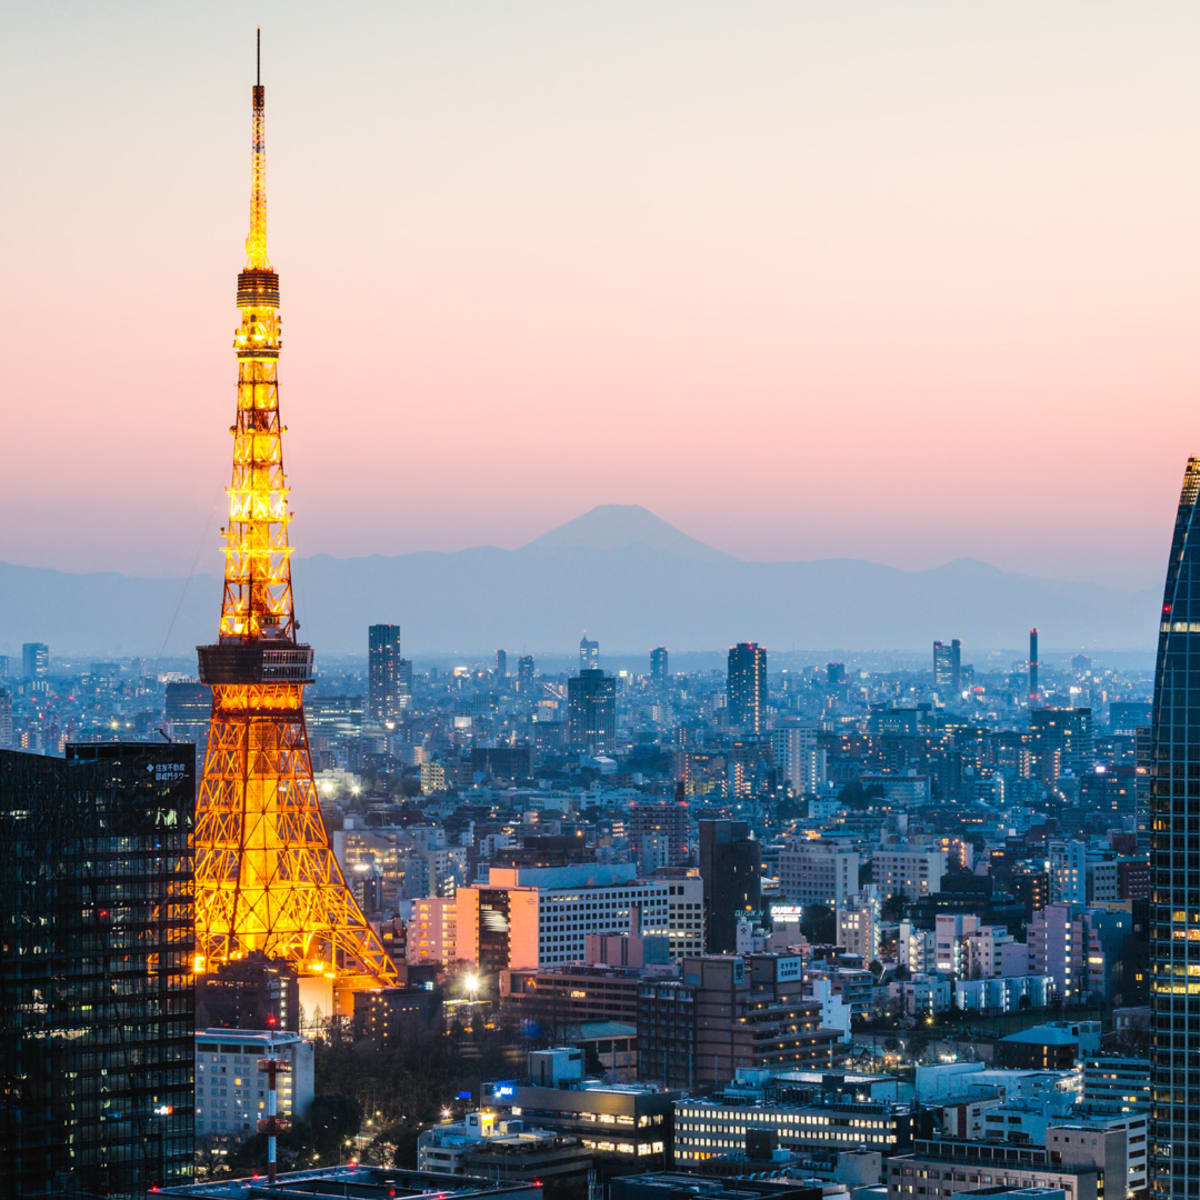 4-Day Japan, Travel Guide: Where to Stay, and Eat - Journal